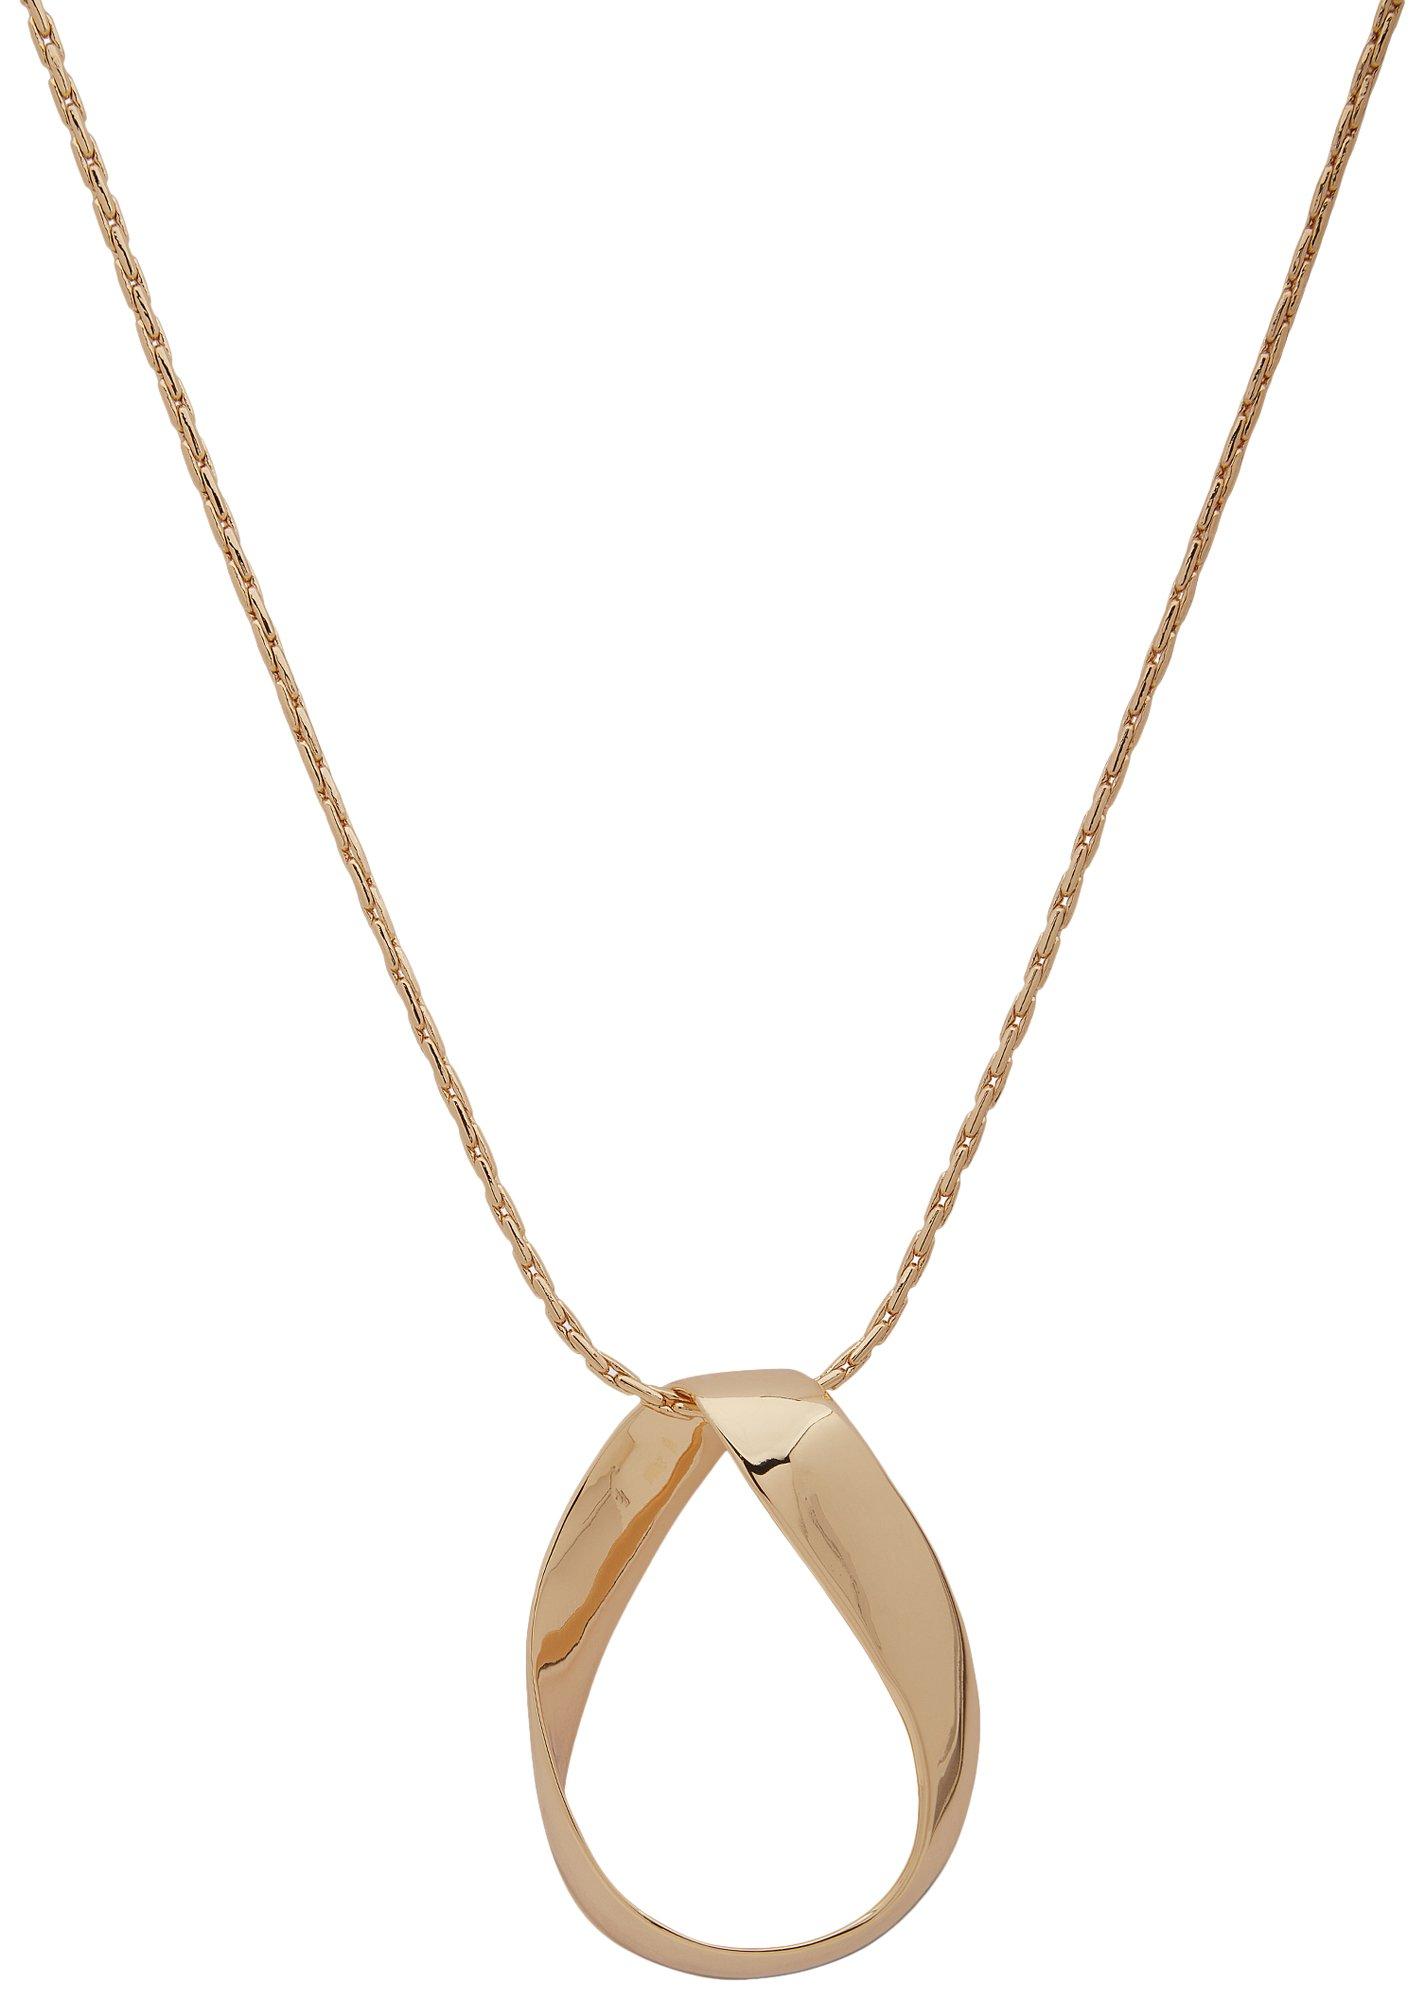 34 In. Twisted Teardrop Gold Tone Chain Necklace